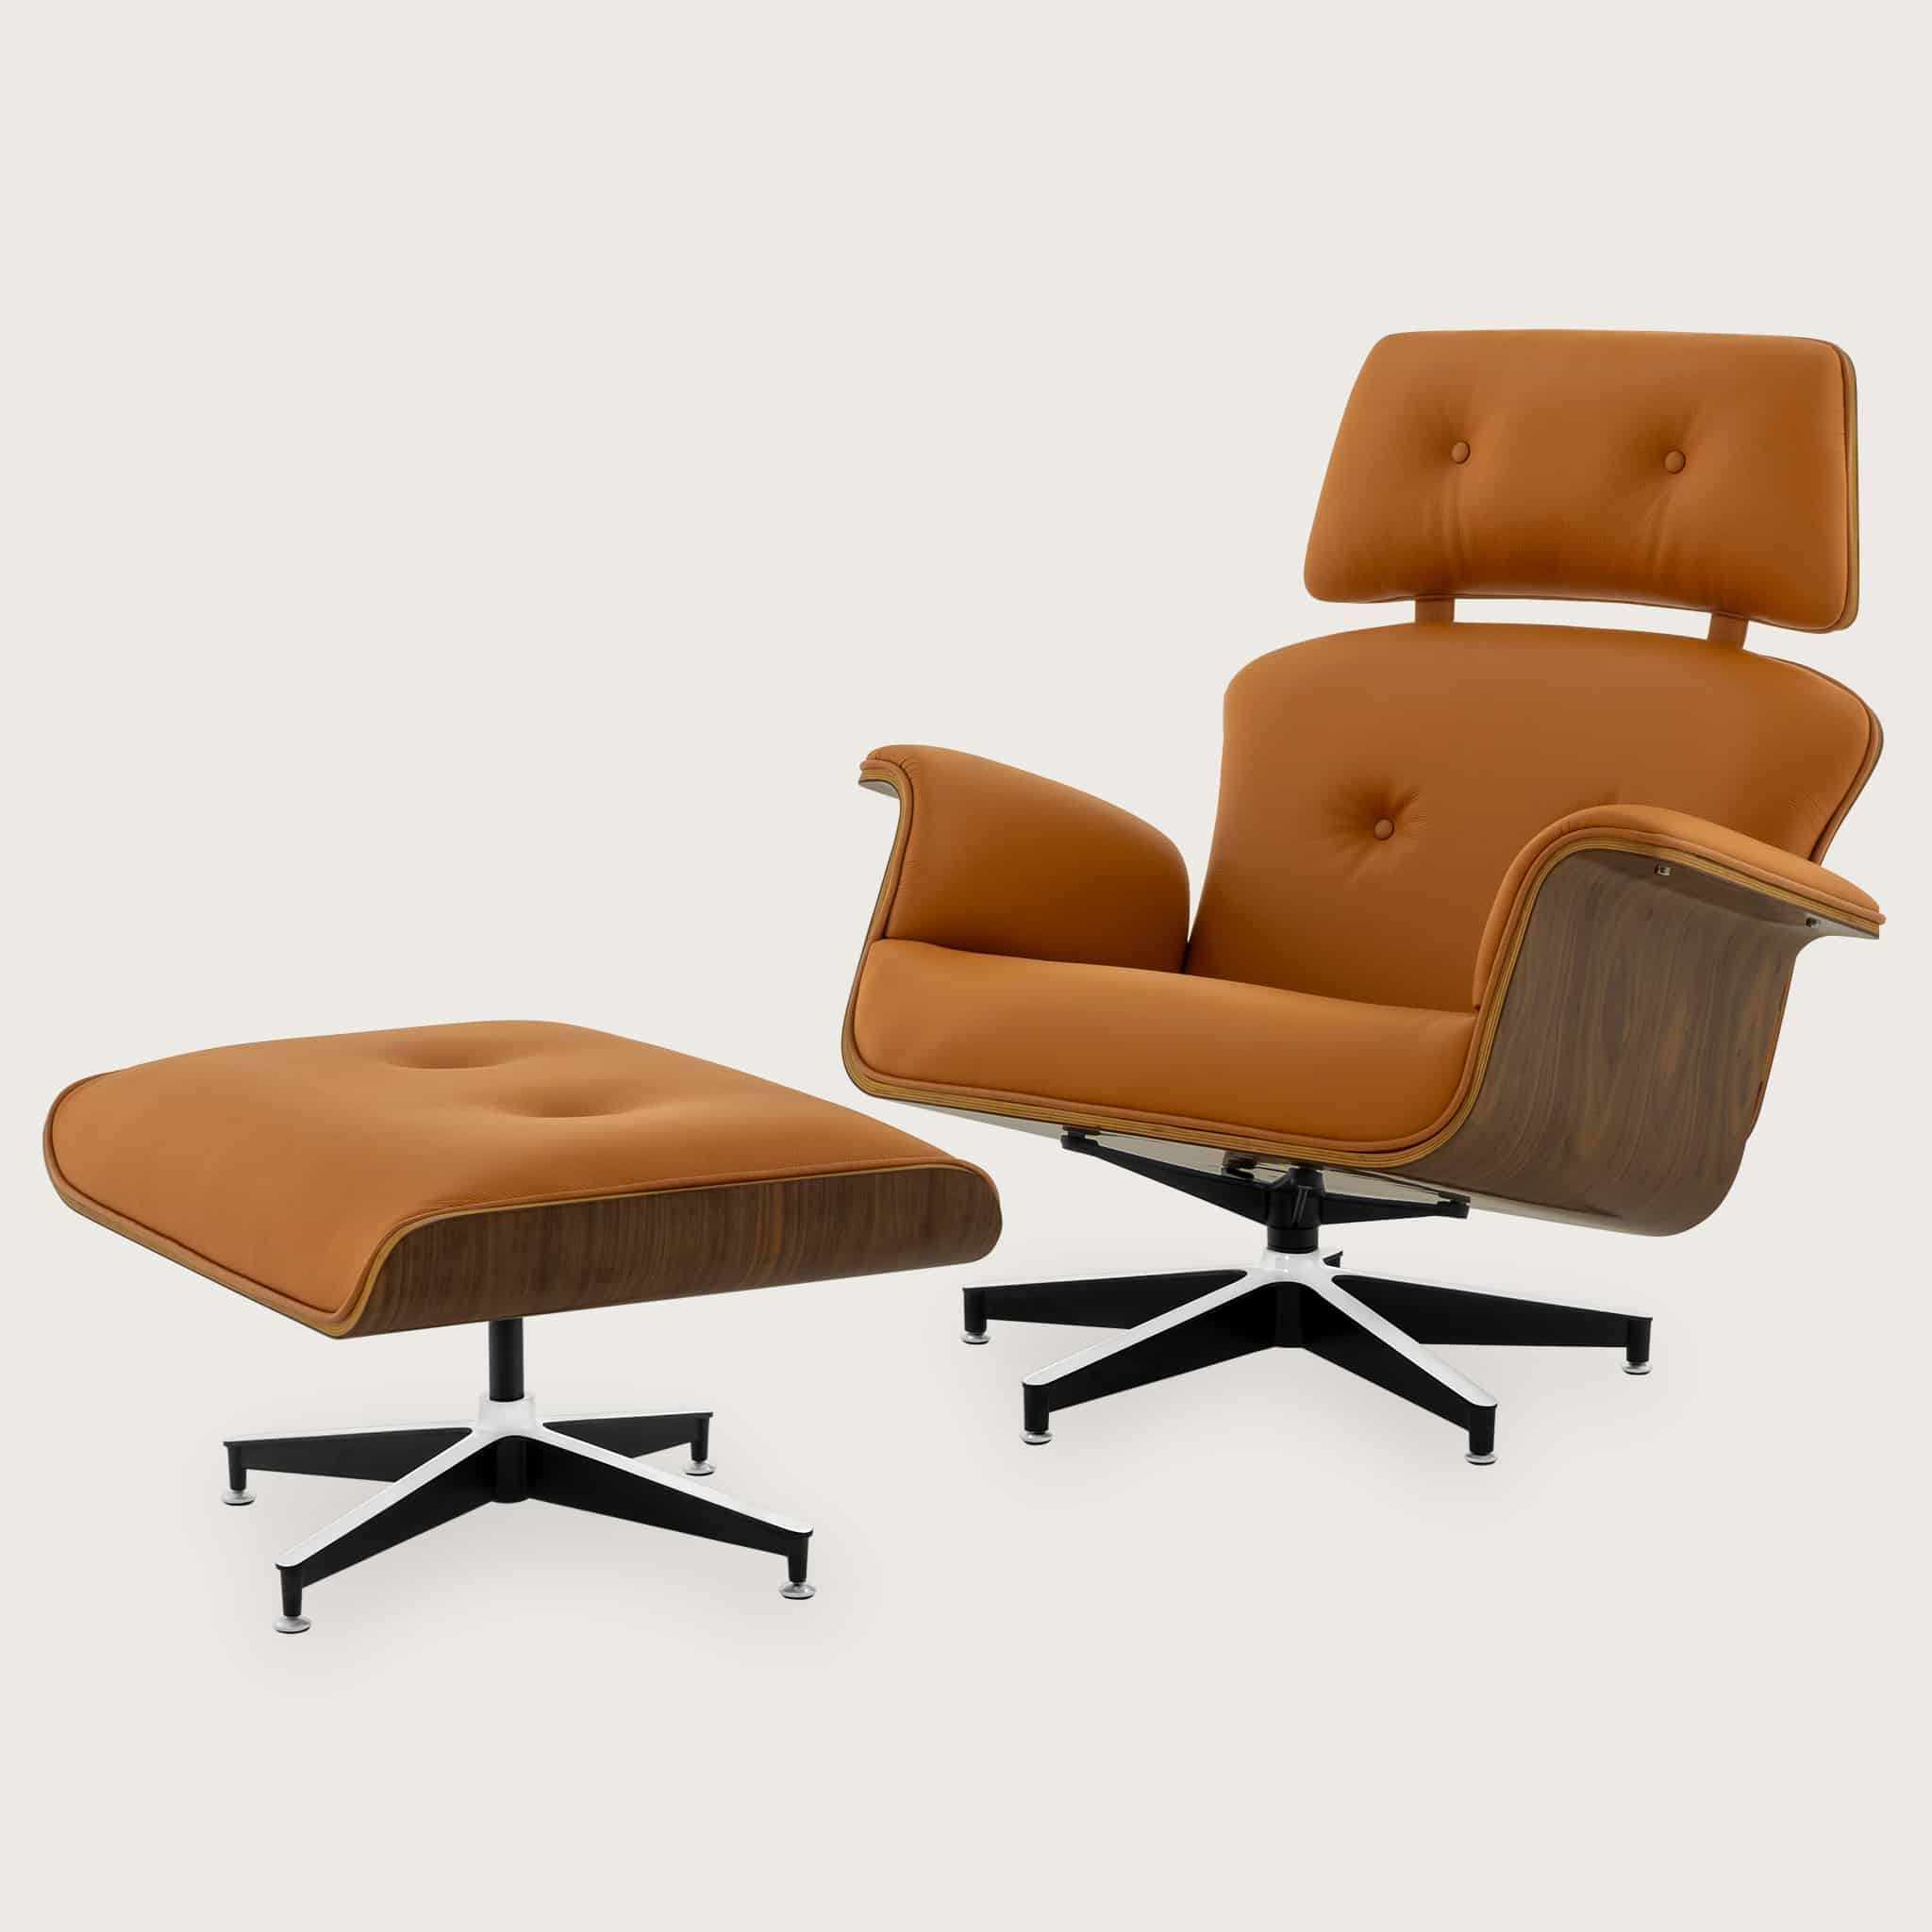 Caramel Leather Lounge Chair and Stool 01